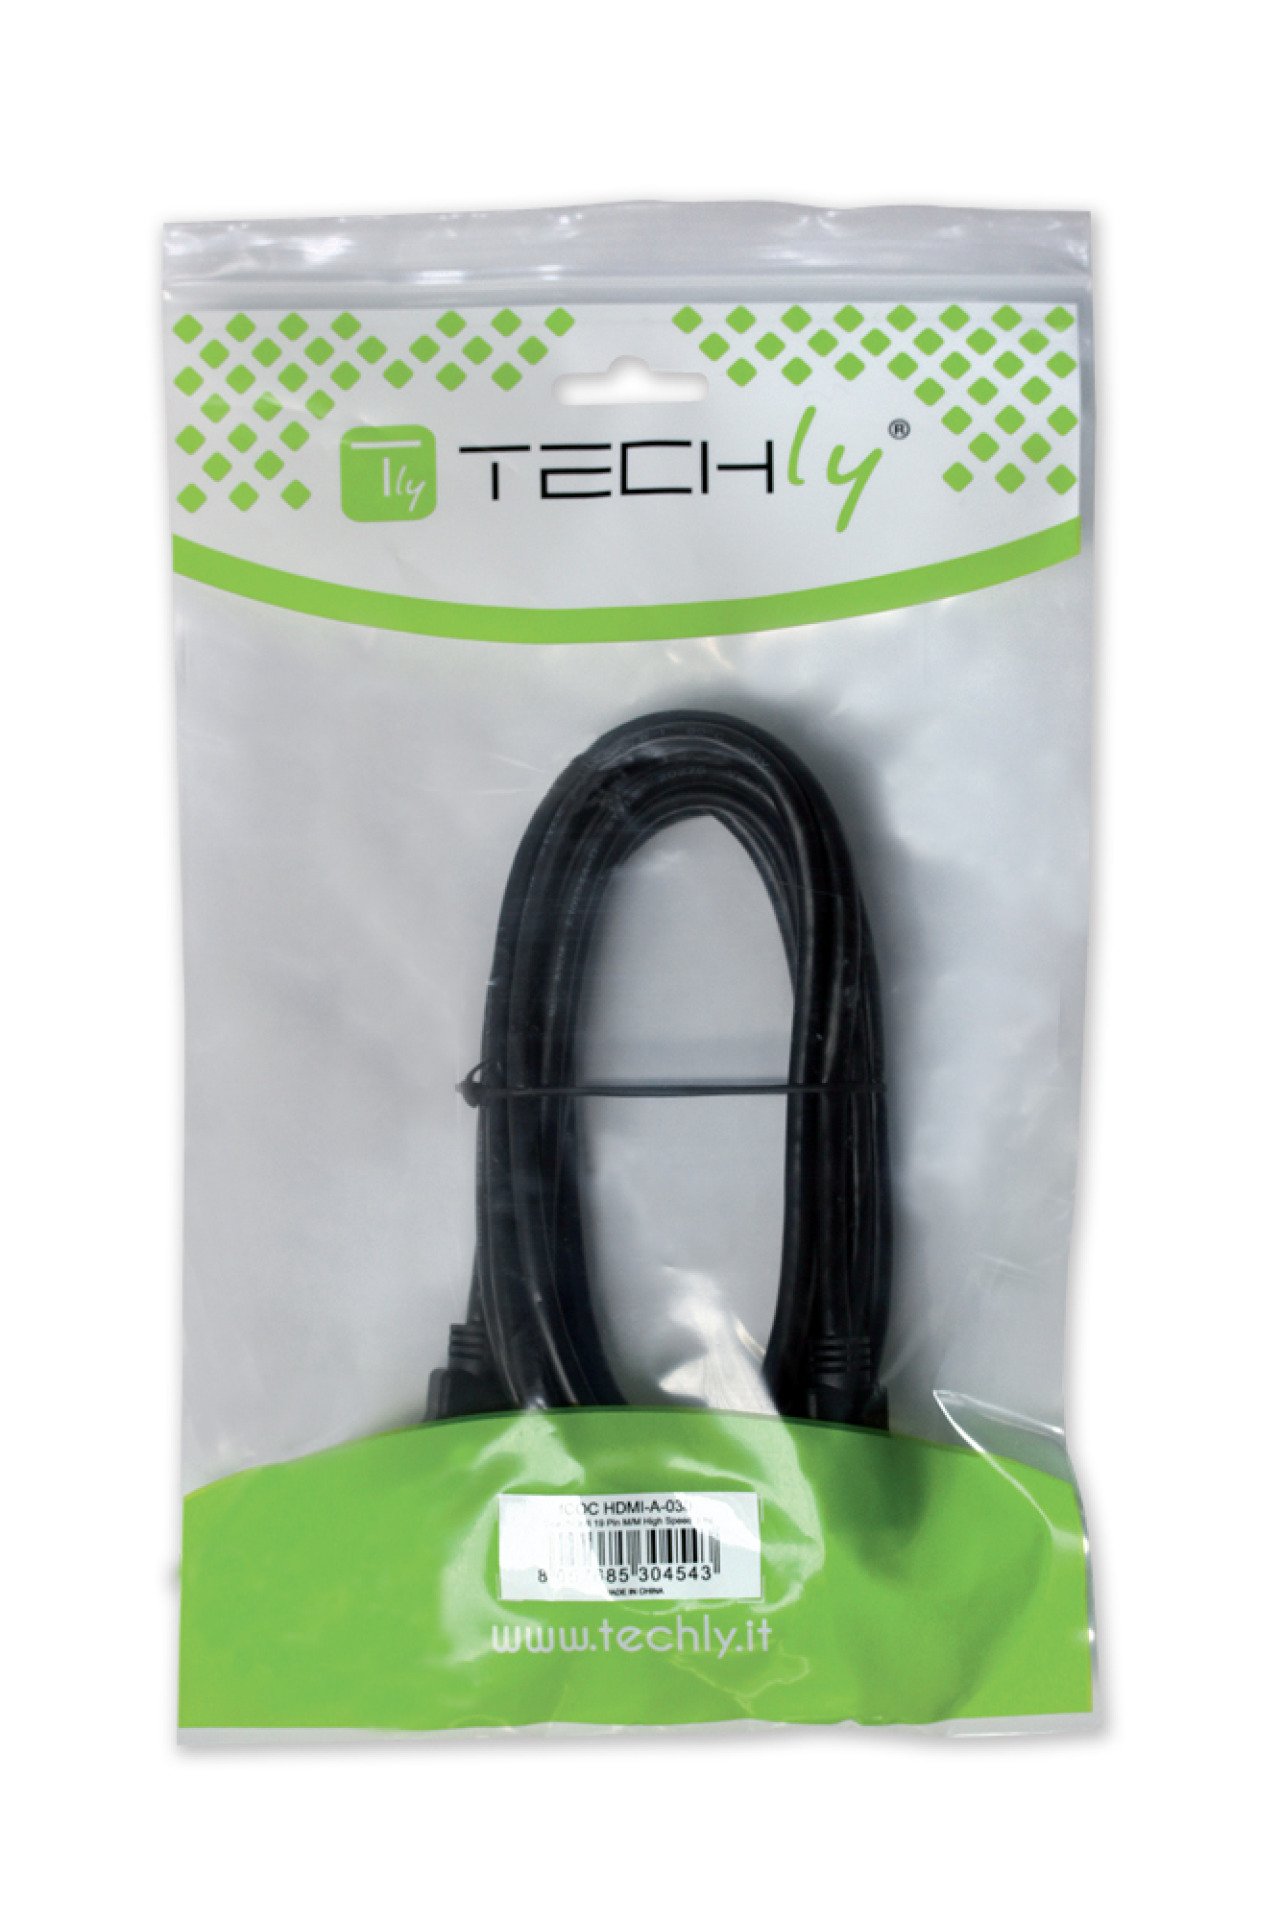 HDMI High Speed Cable with Ethernet, 1x angl., 2 m